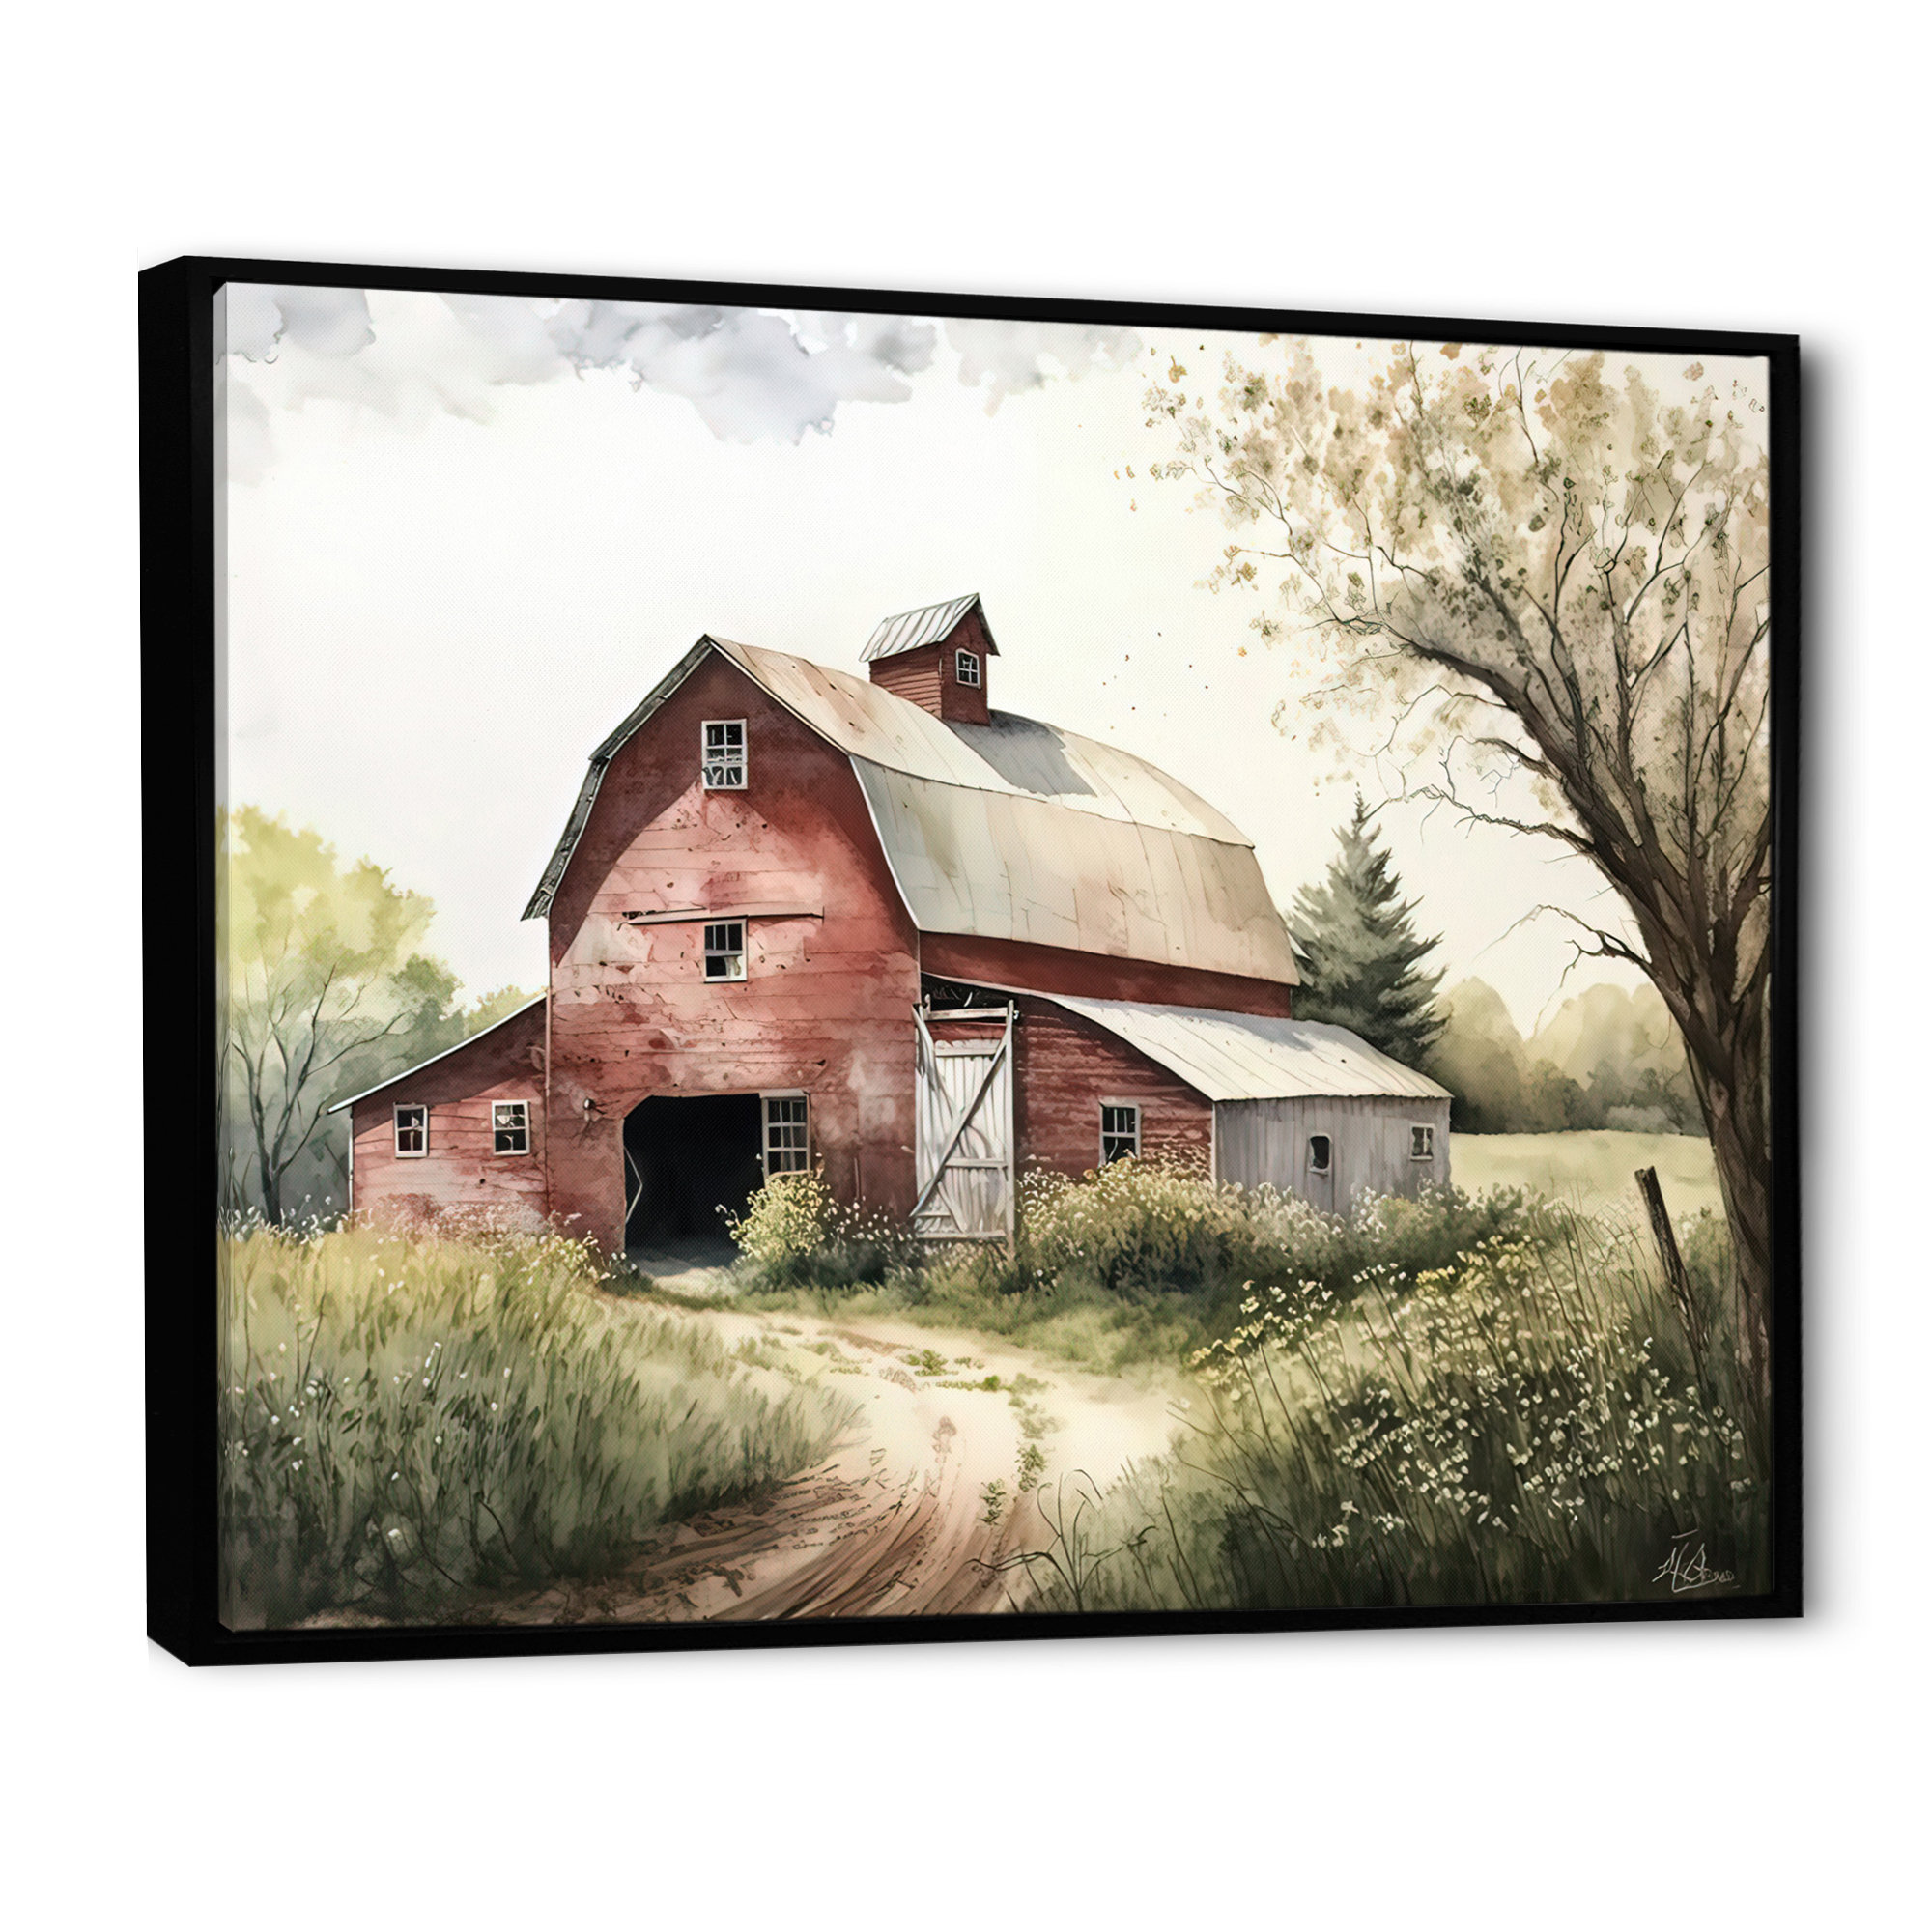 Premium Photo  Watercolor wooden clothes dryer with clothes on it,house  with wooden door